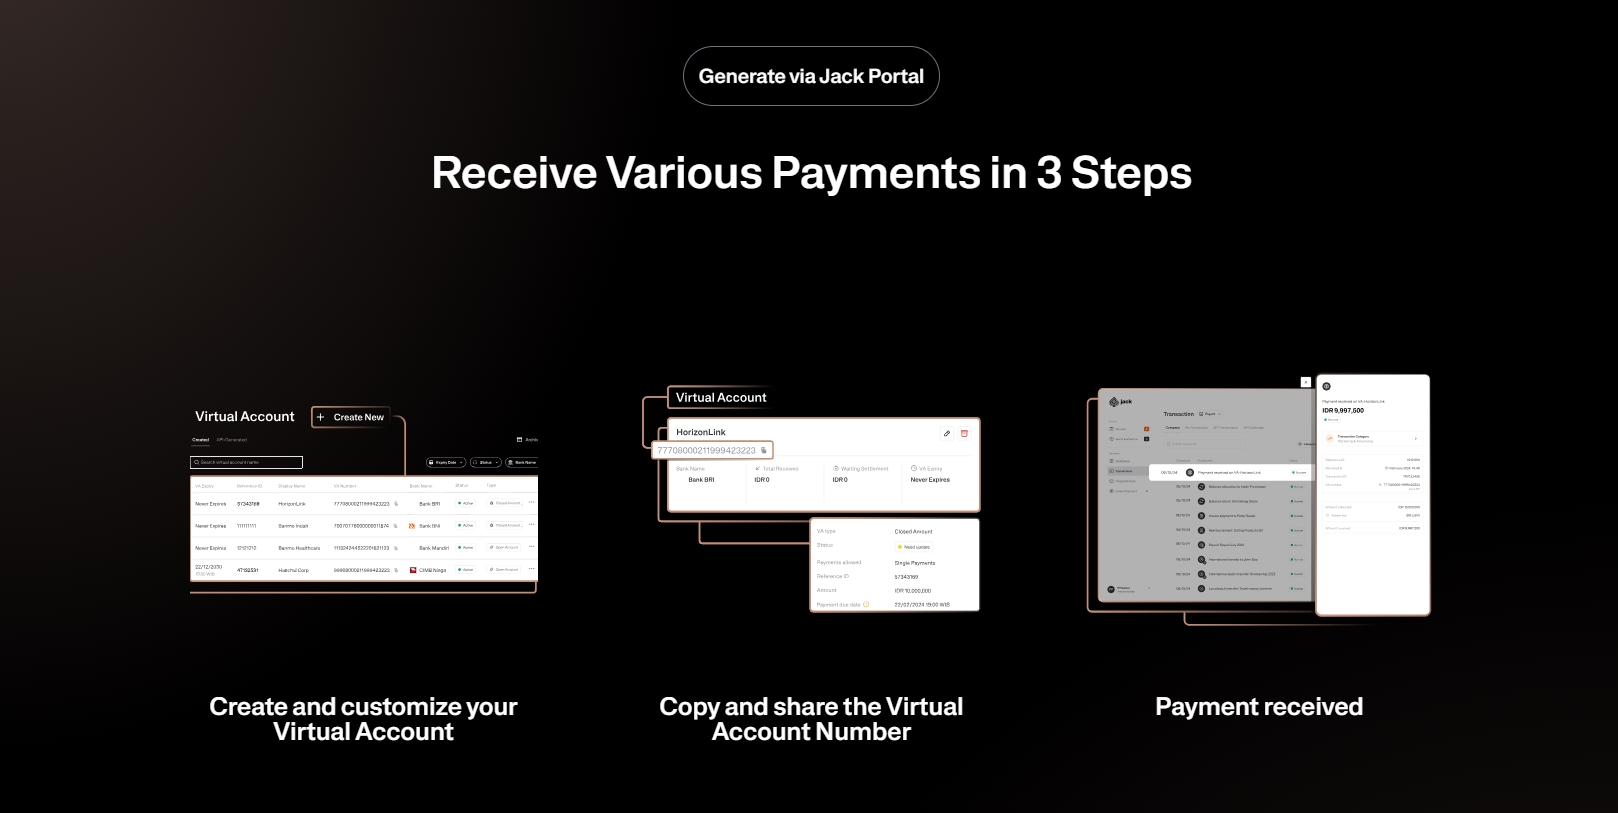 Receive Various Payments in 3 Steps